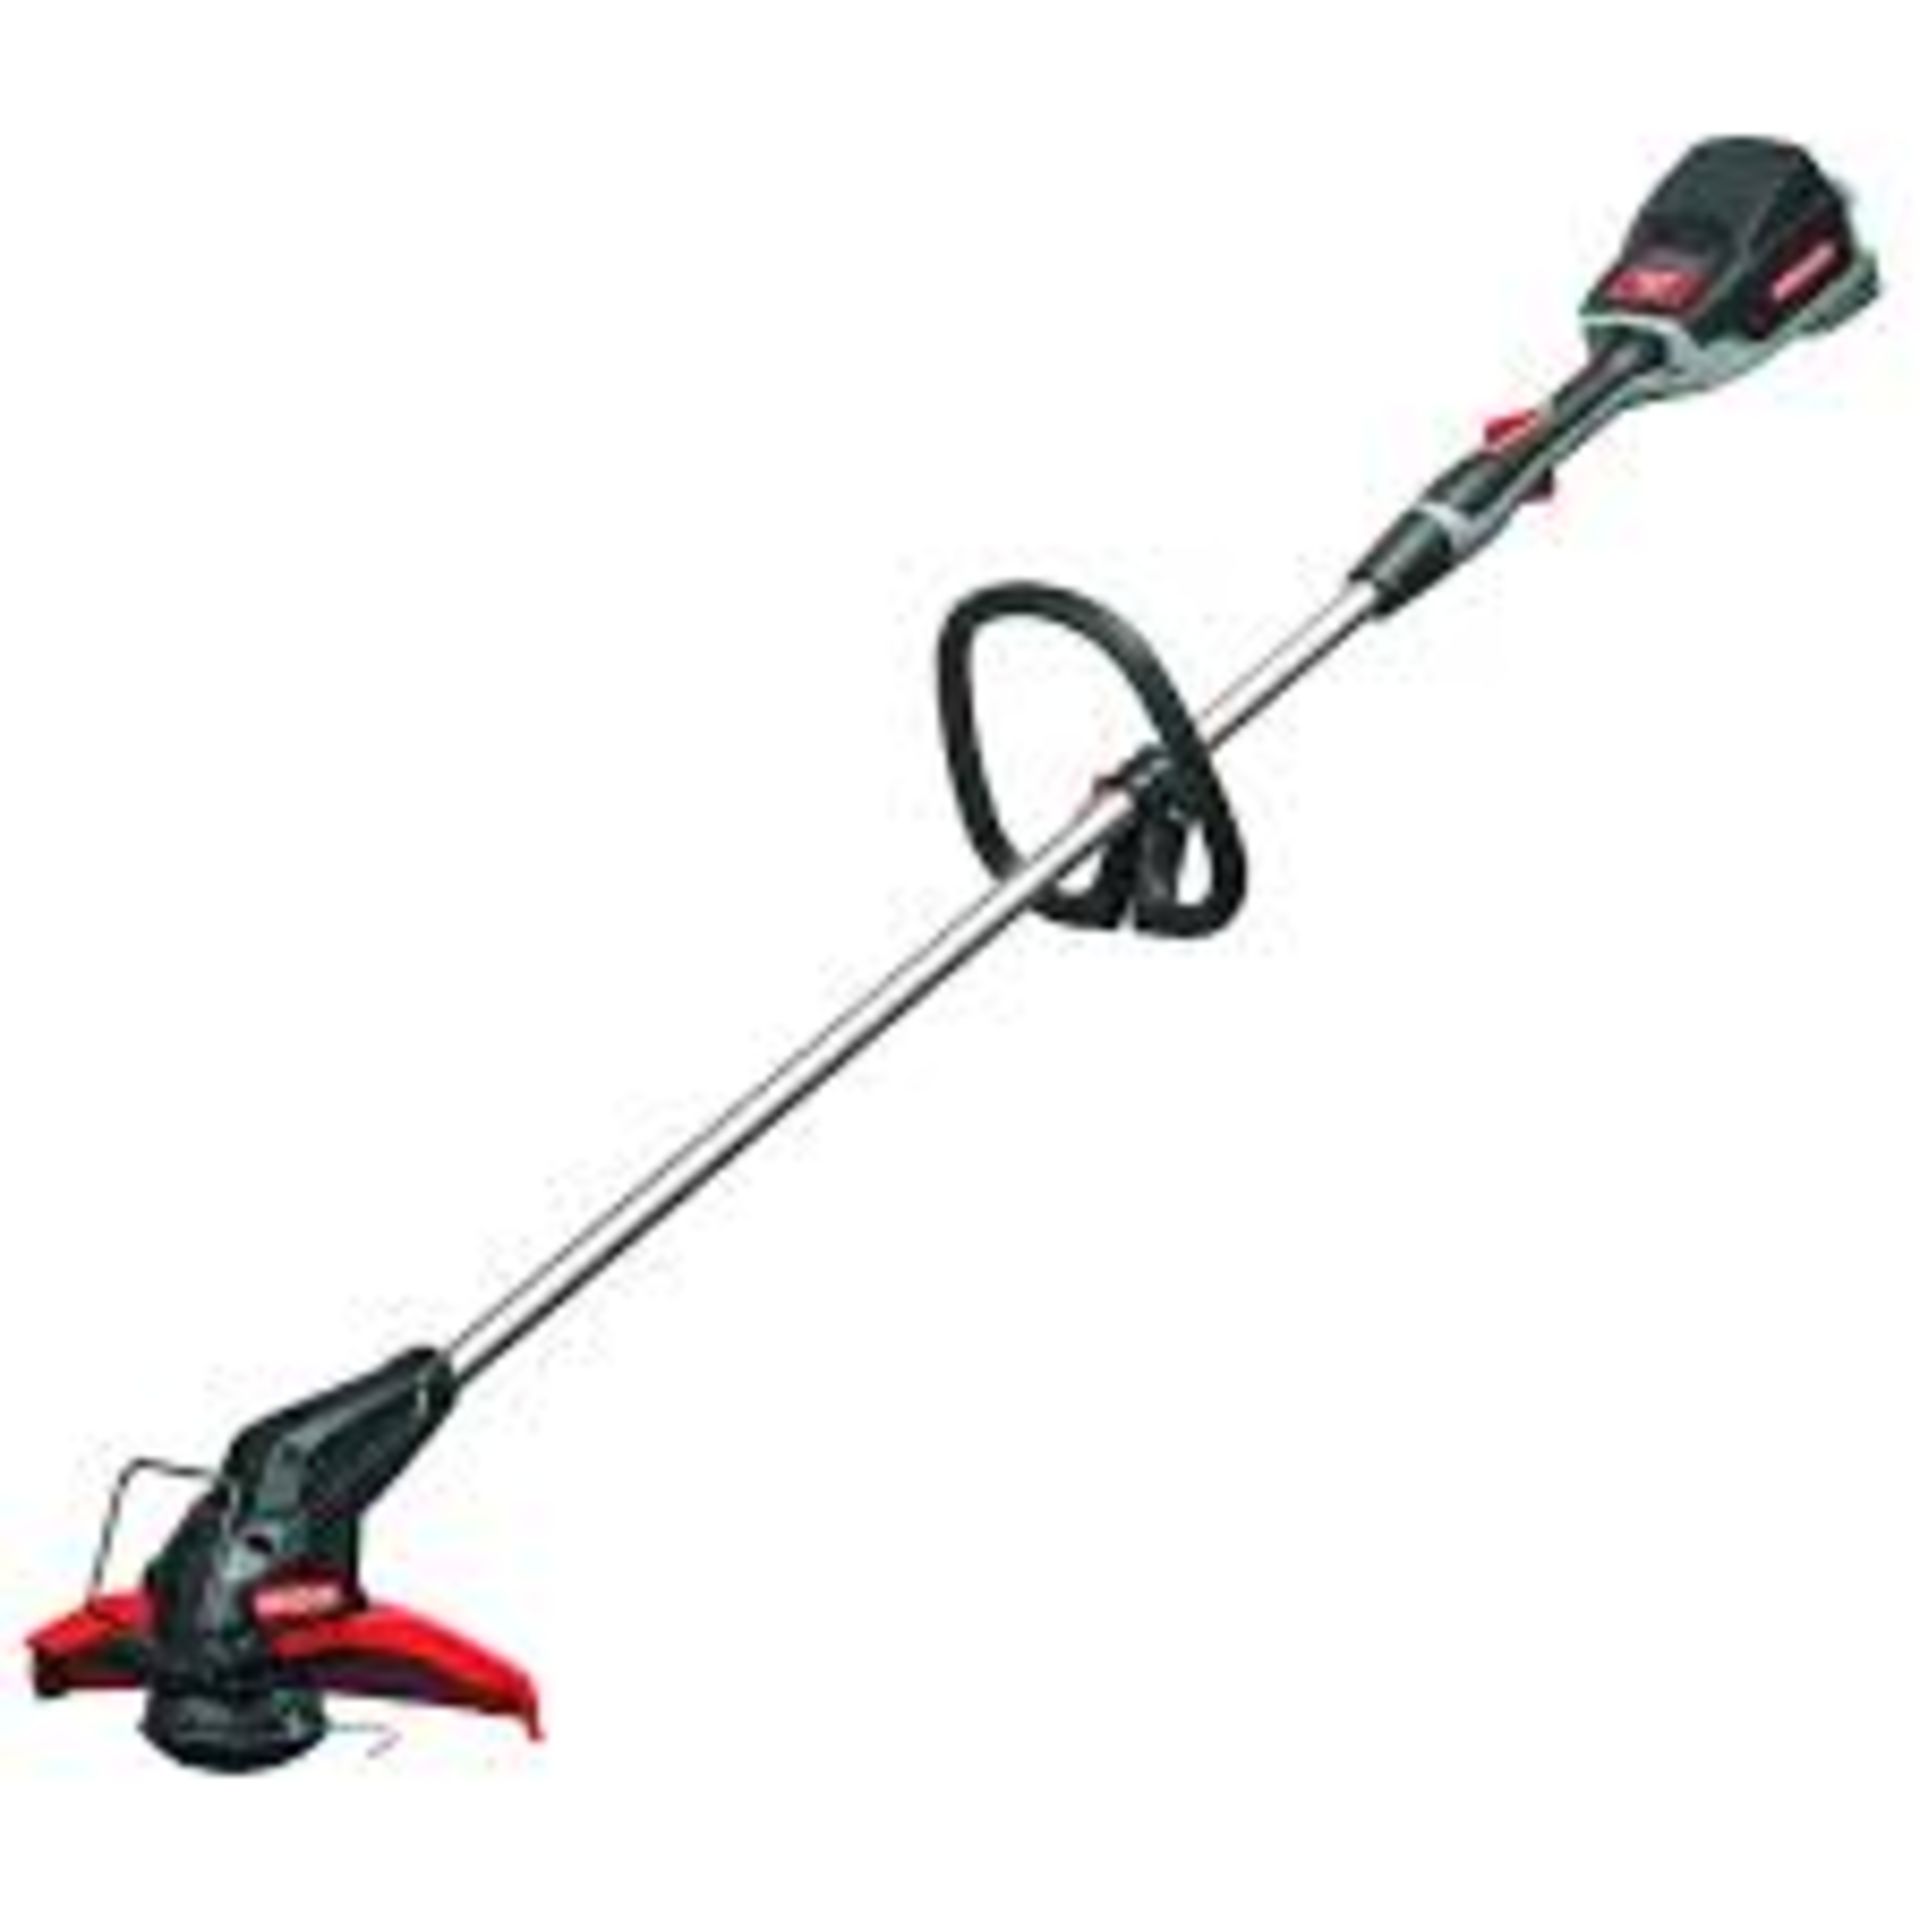 Boxed Oregon Gator Speedload Trimmer (32V Lithium ION) RRP £600 (Public Viewing and Appraisals